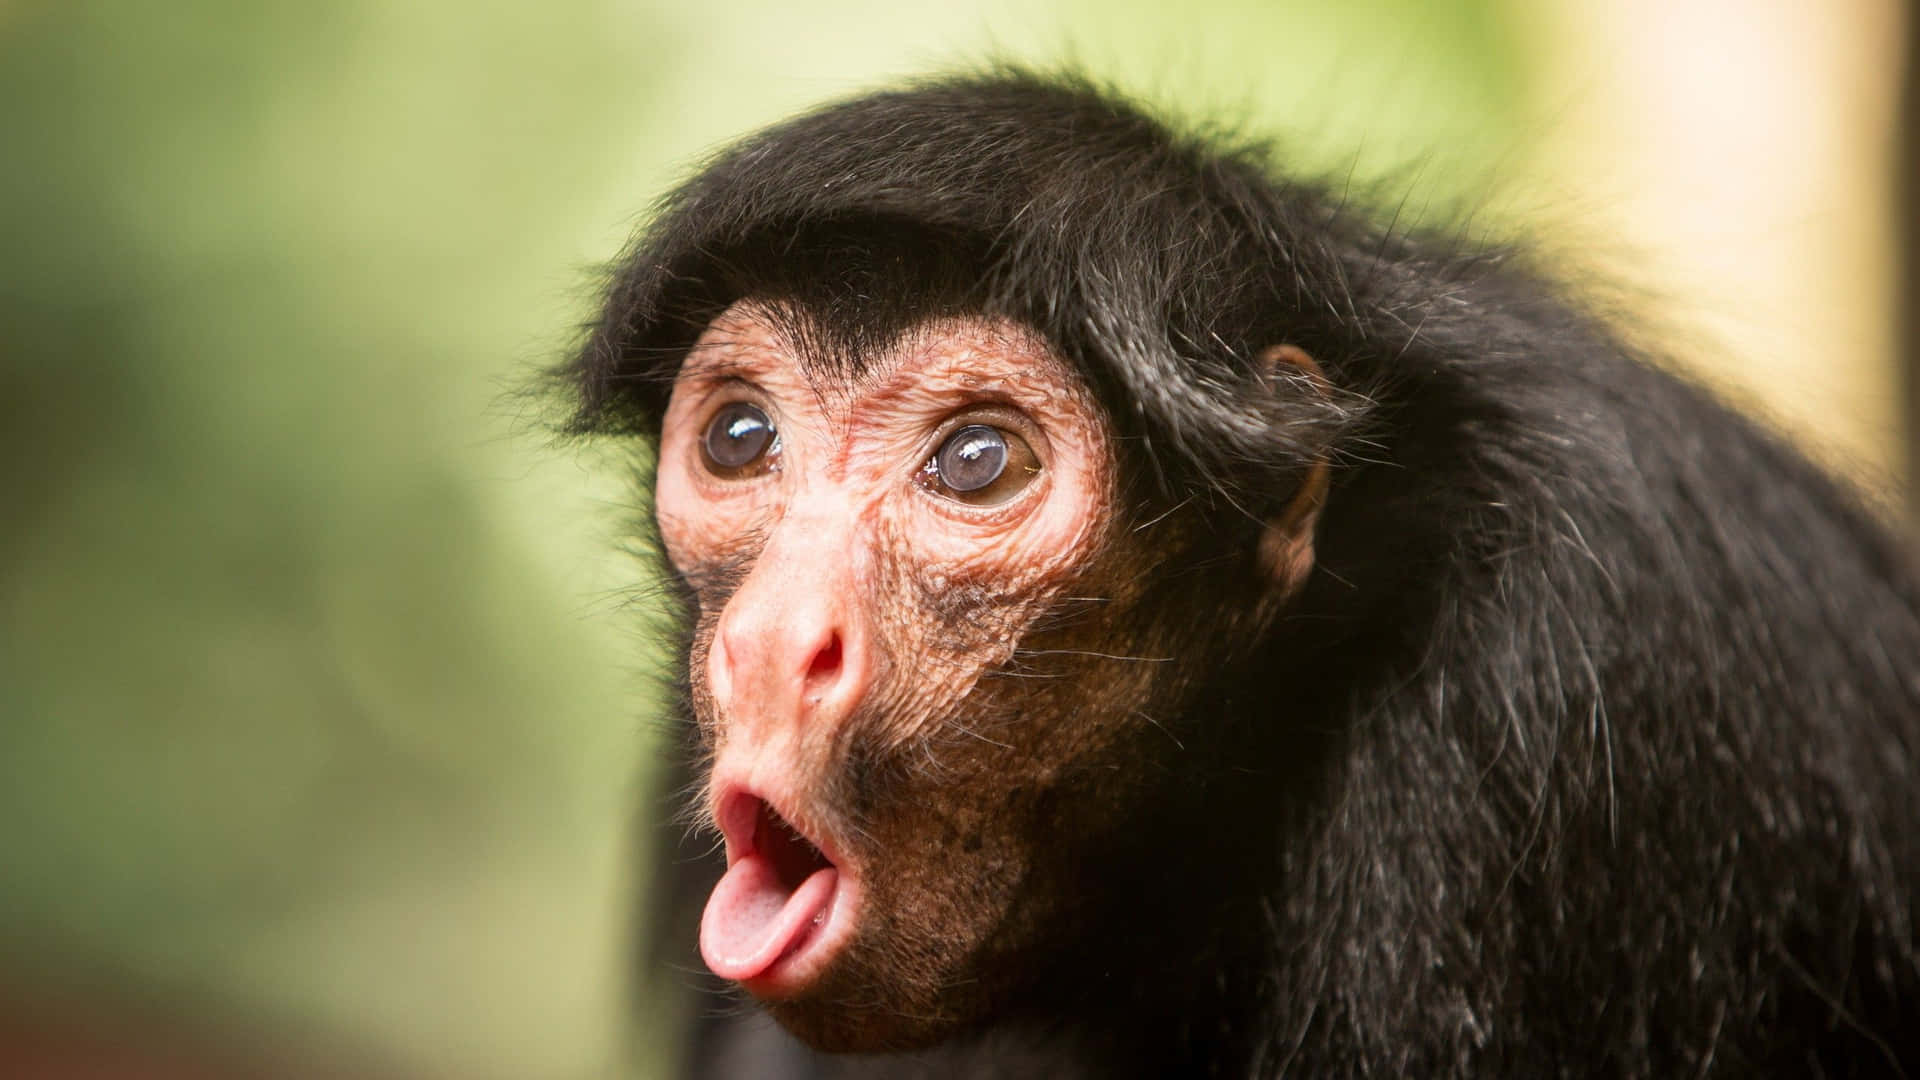 A Black Monkey With Its Tongue Out